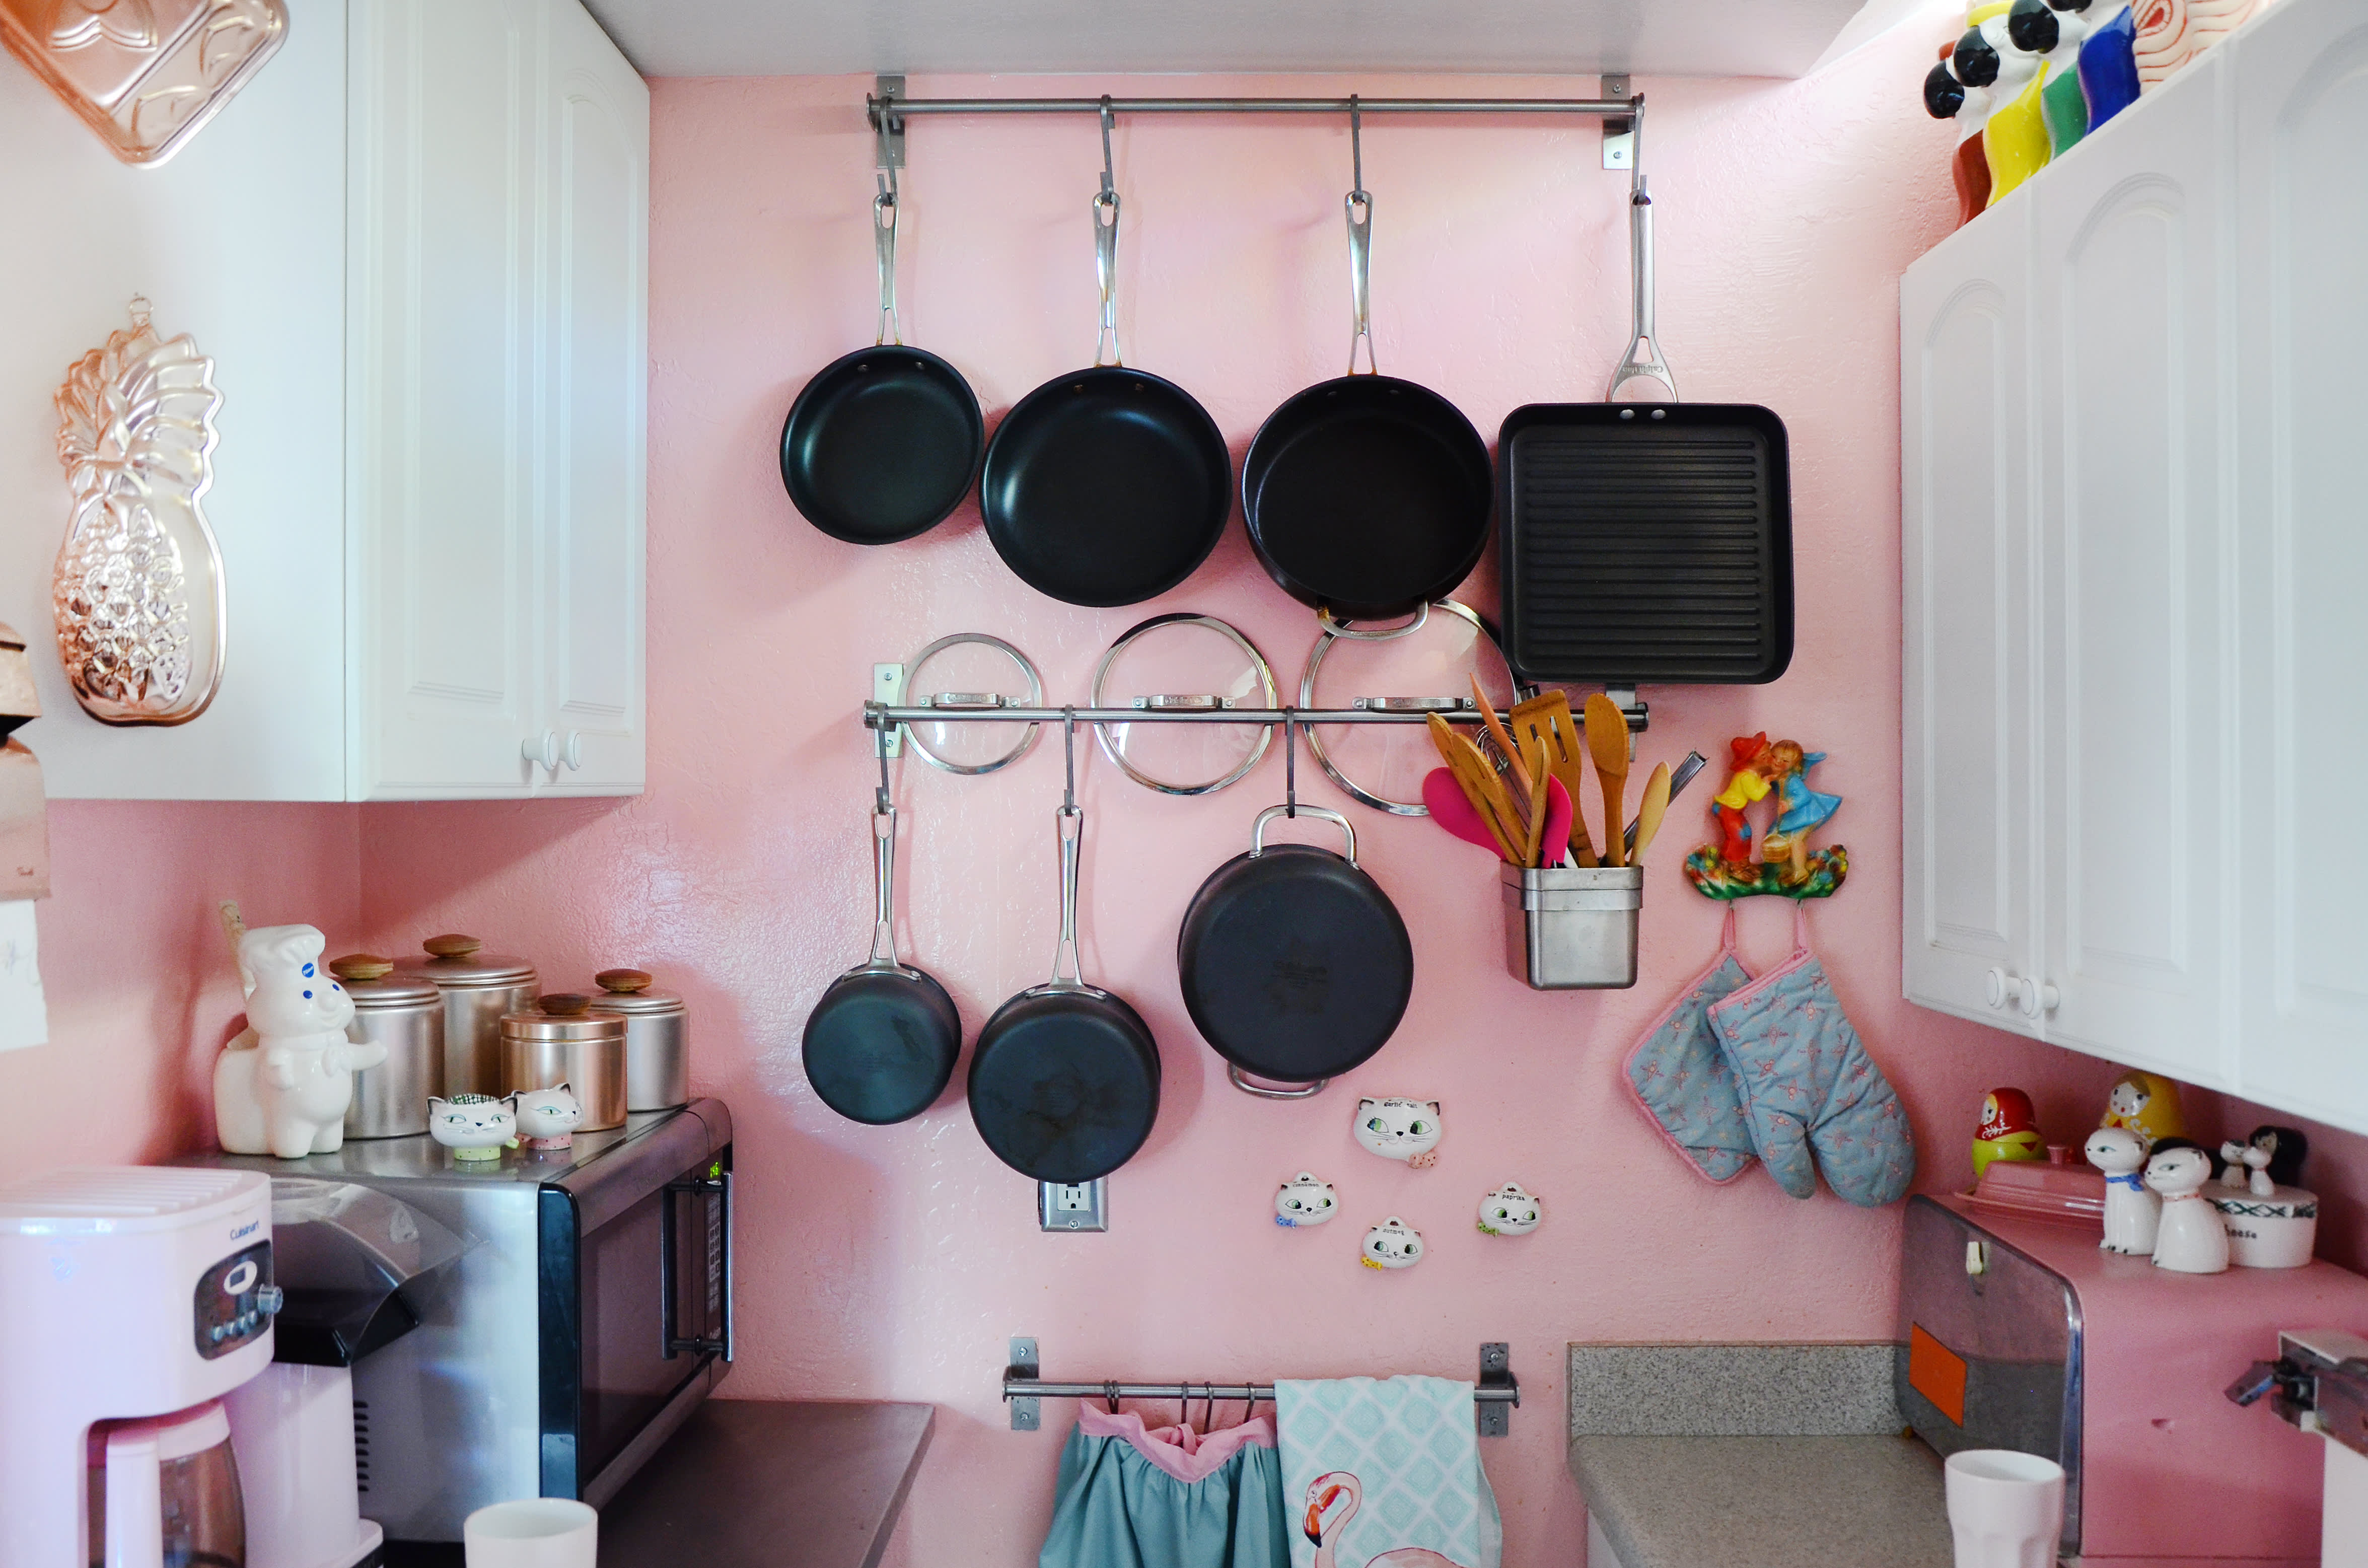 7 Expert Tips For Organizing Your Pots and Pans